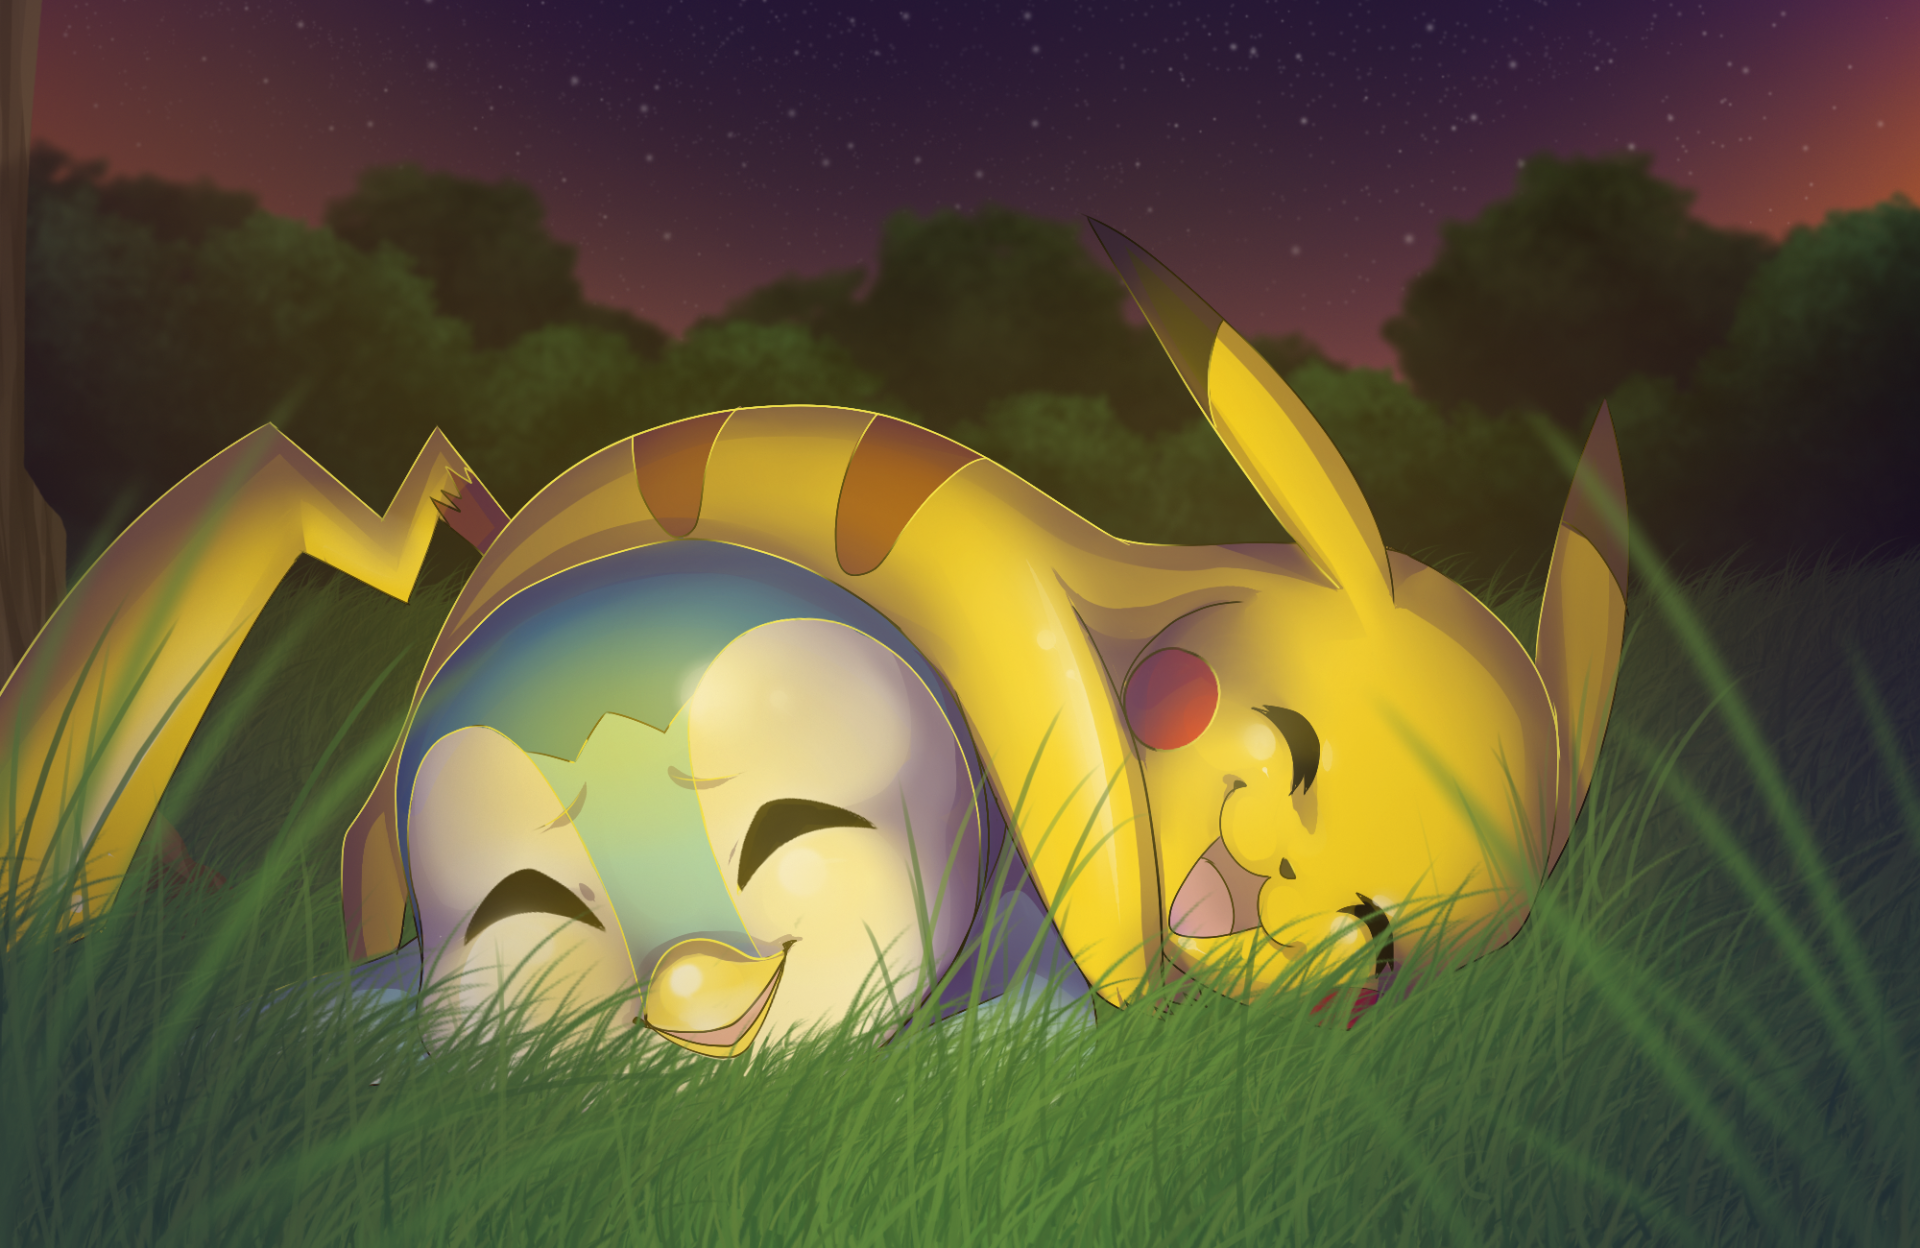  Pikachu  and Piplup HD  Wallpaper  Background Image 